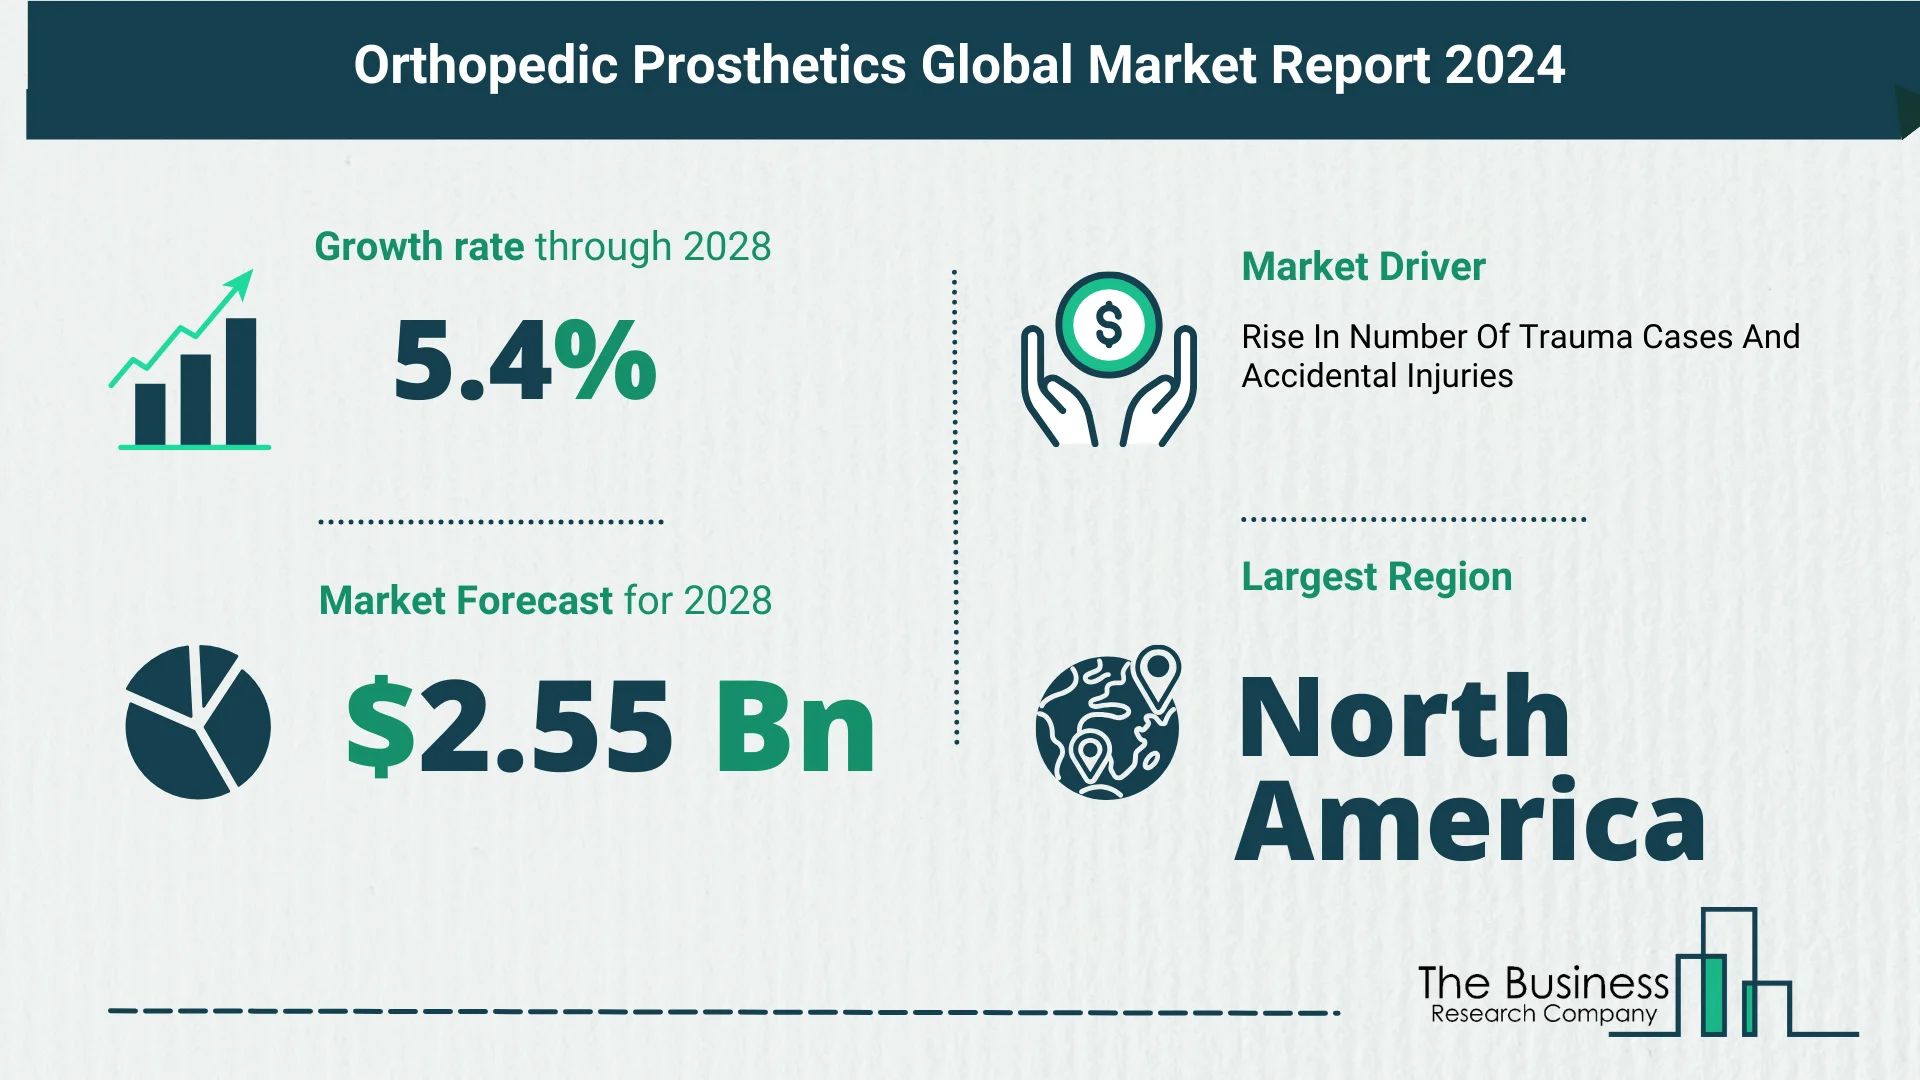 Global Orthopedic Prosthetics Market Overview 2024: Size, Drivers, And Trends